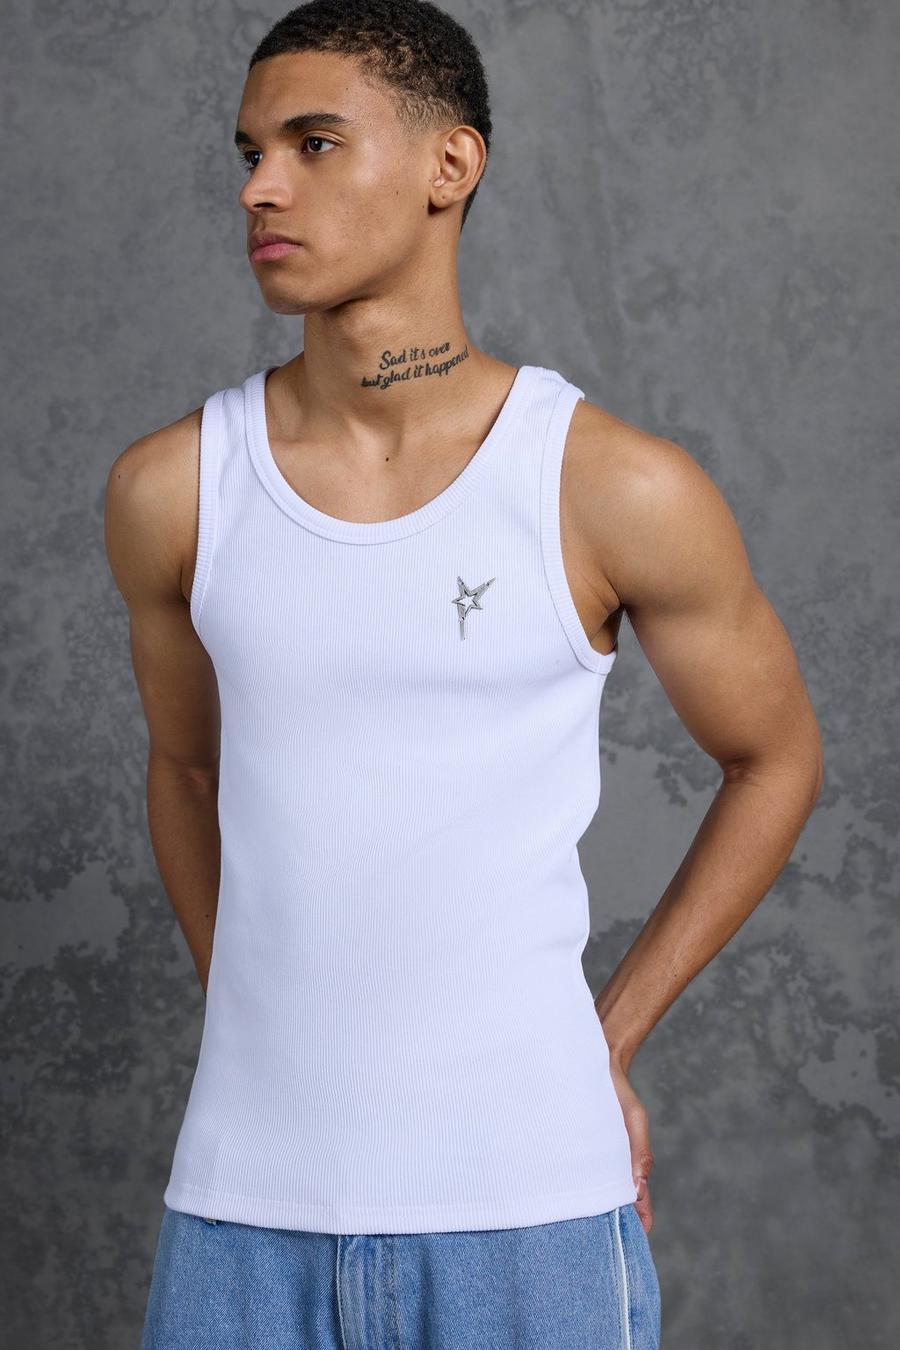 Geripptes Muscle-Fit Tanktop mit Metall-Sternen, White